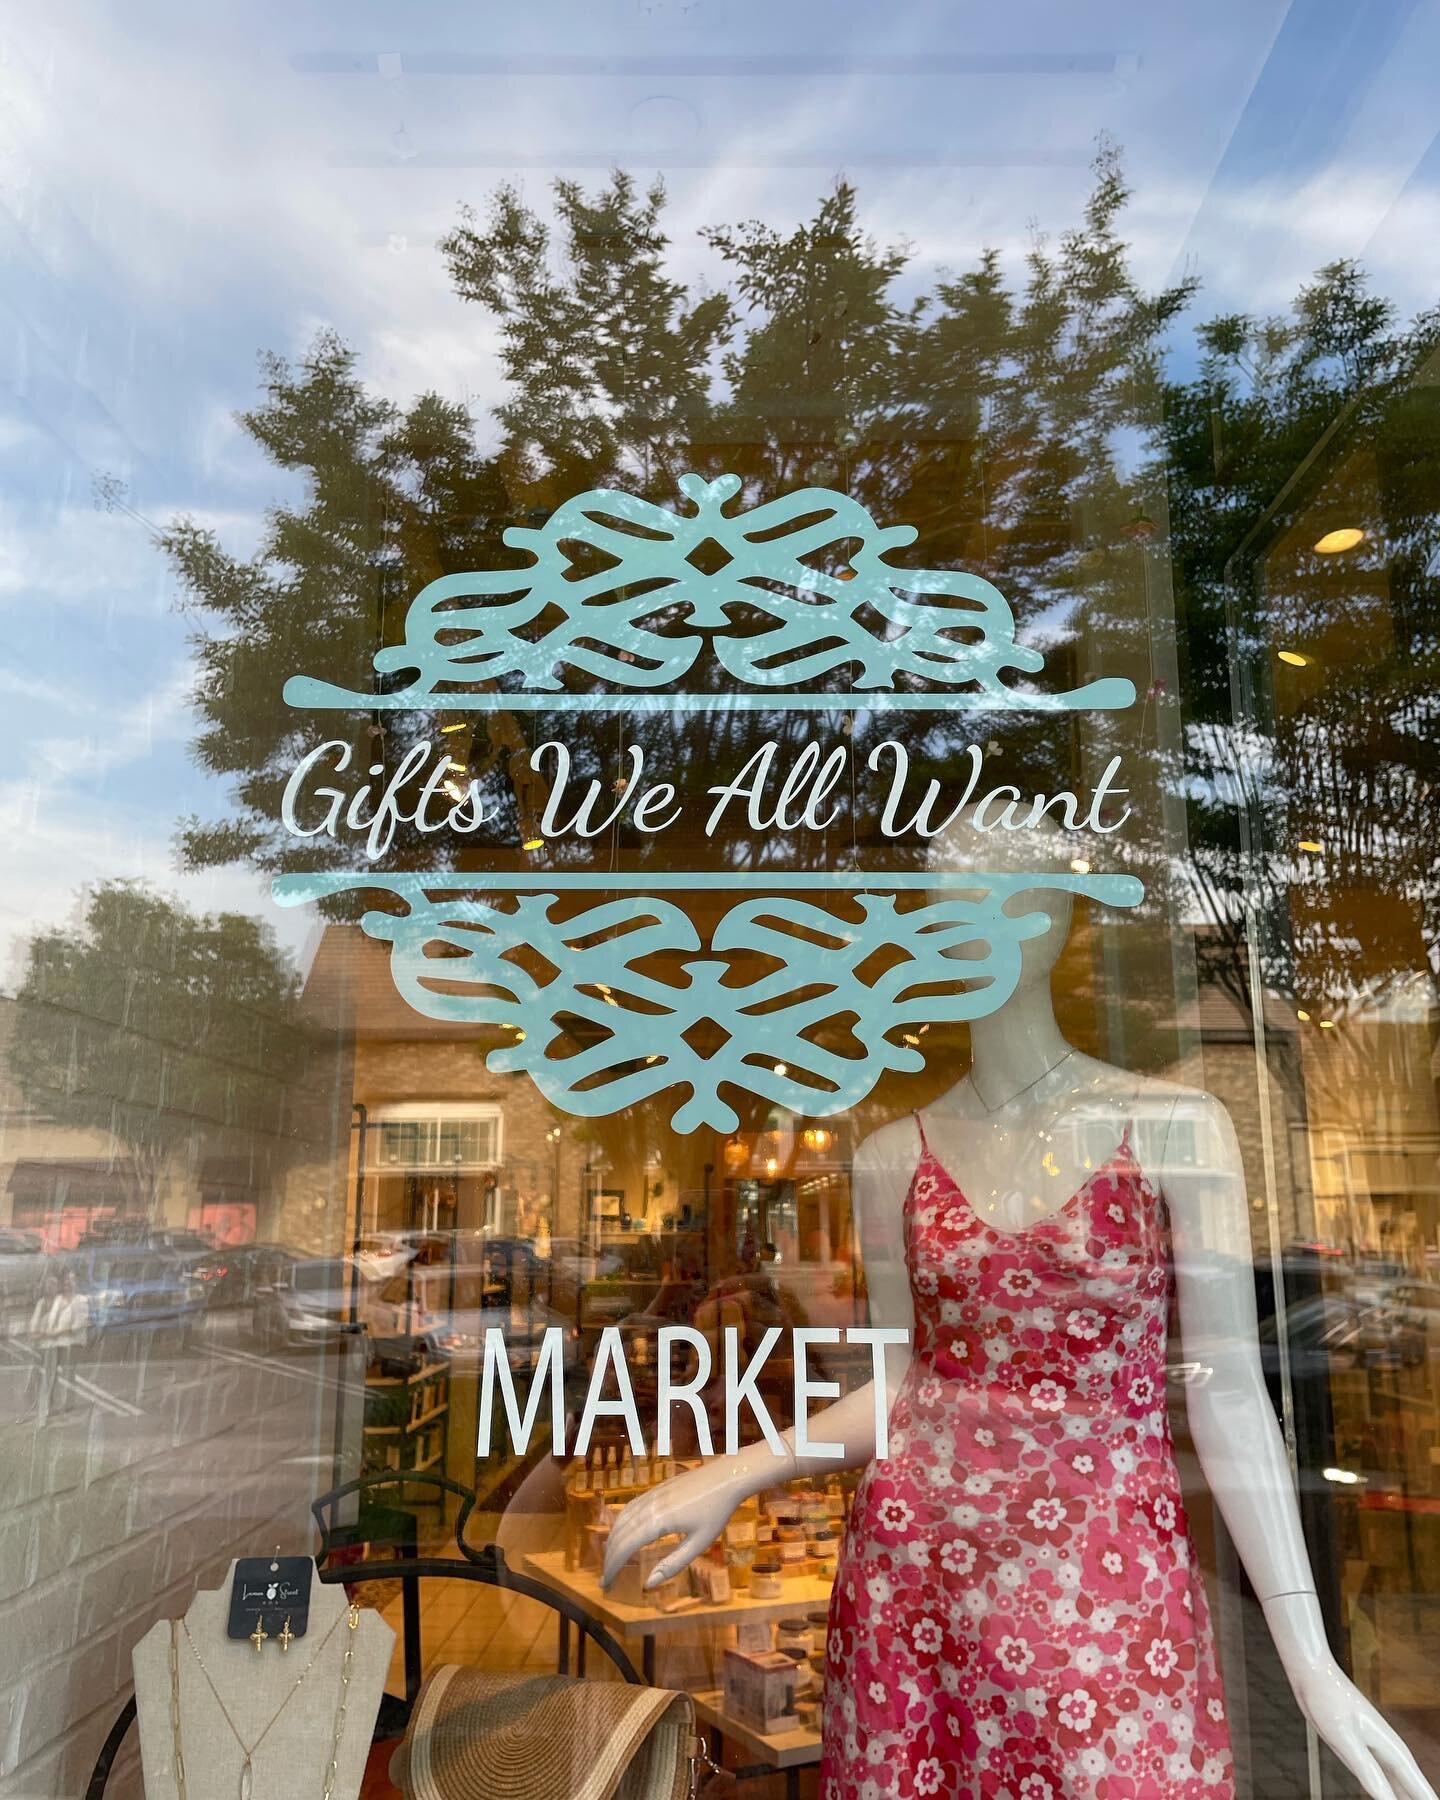 You can now shop Whole Creative at a new location. Visit Gifts We All Want at The Forum in Peachtree Corners!!
#giftsweallwant #wholecreative #shoplocal